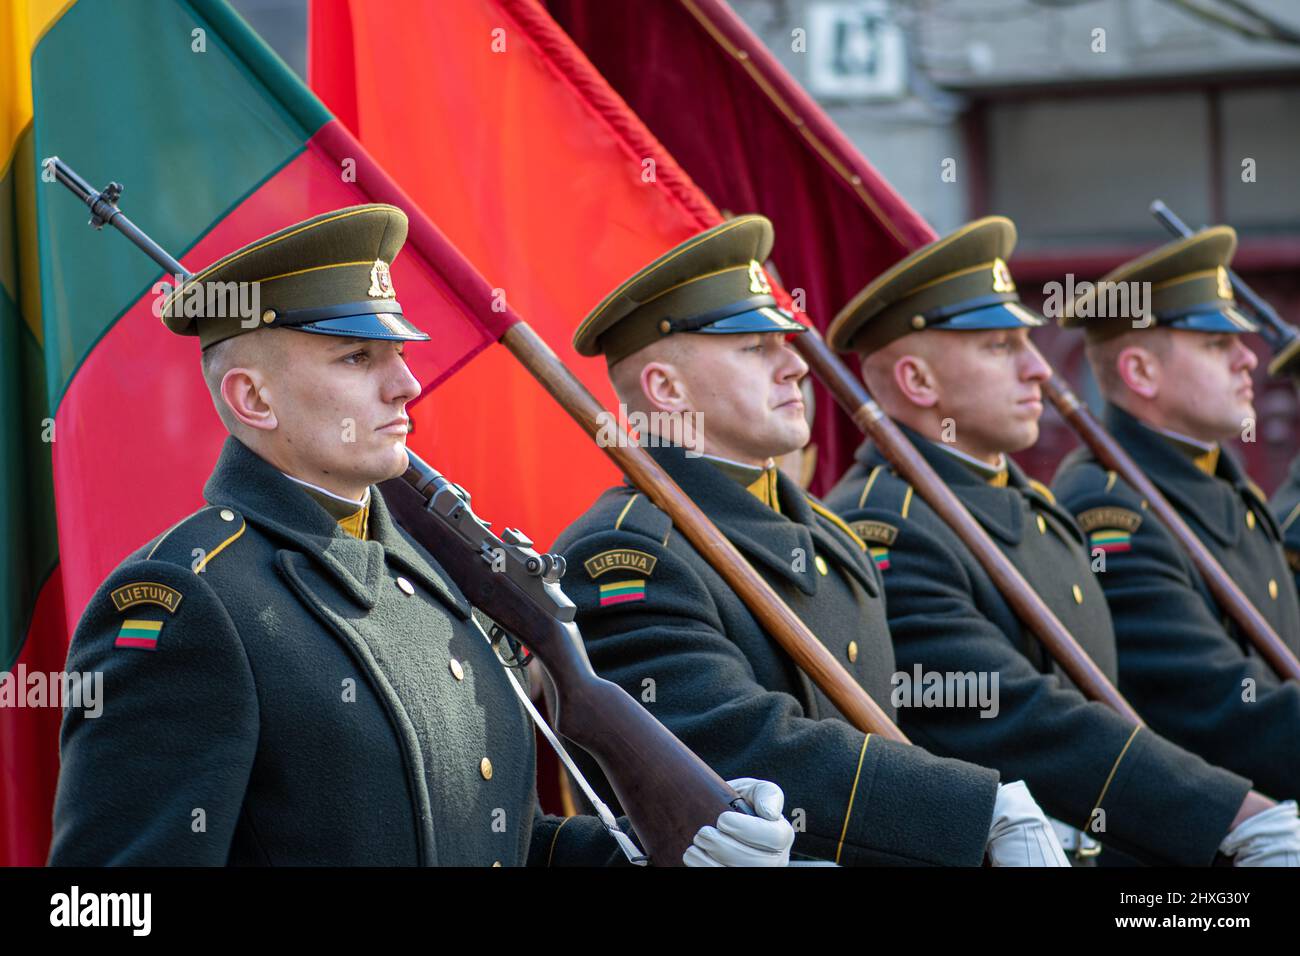 Soldiers in official uniforms marching through the streets of the capital Vilnius, Lithuania with national flags, March 11 Independence Day, close up Stock Photo